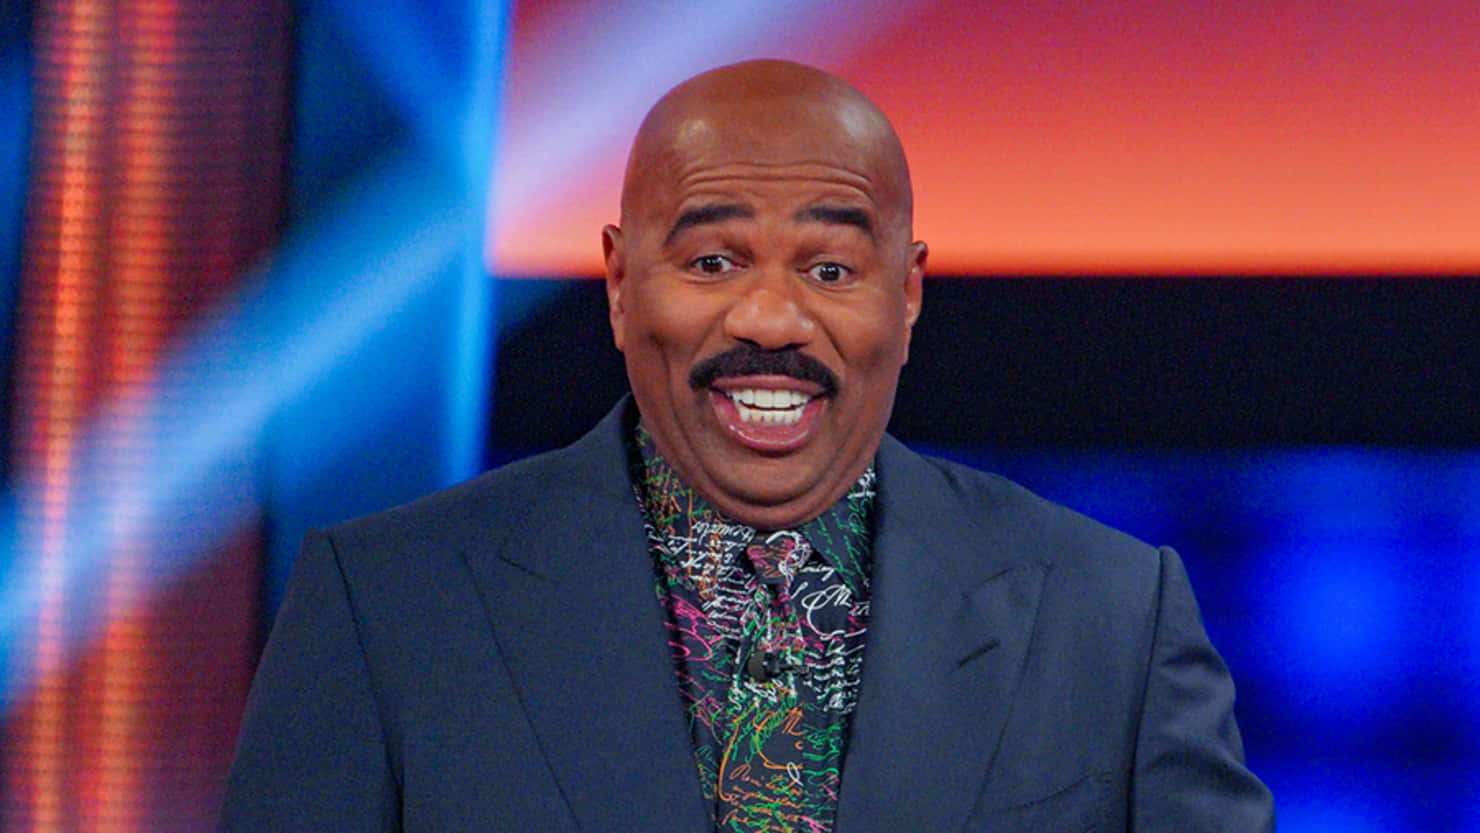 Steve Harvey Smiling In A Colorful Shirt Picture